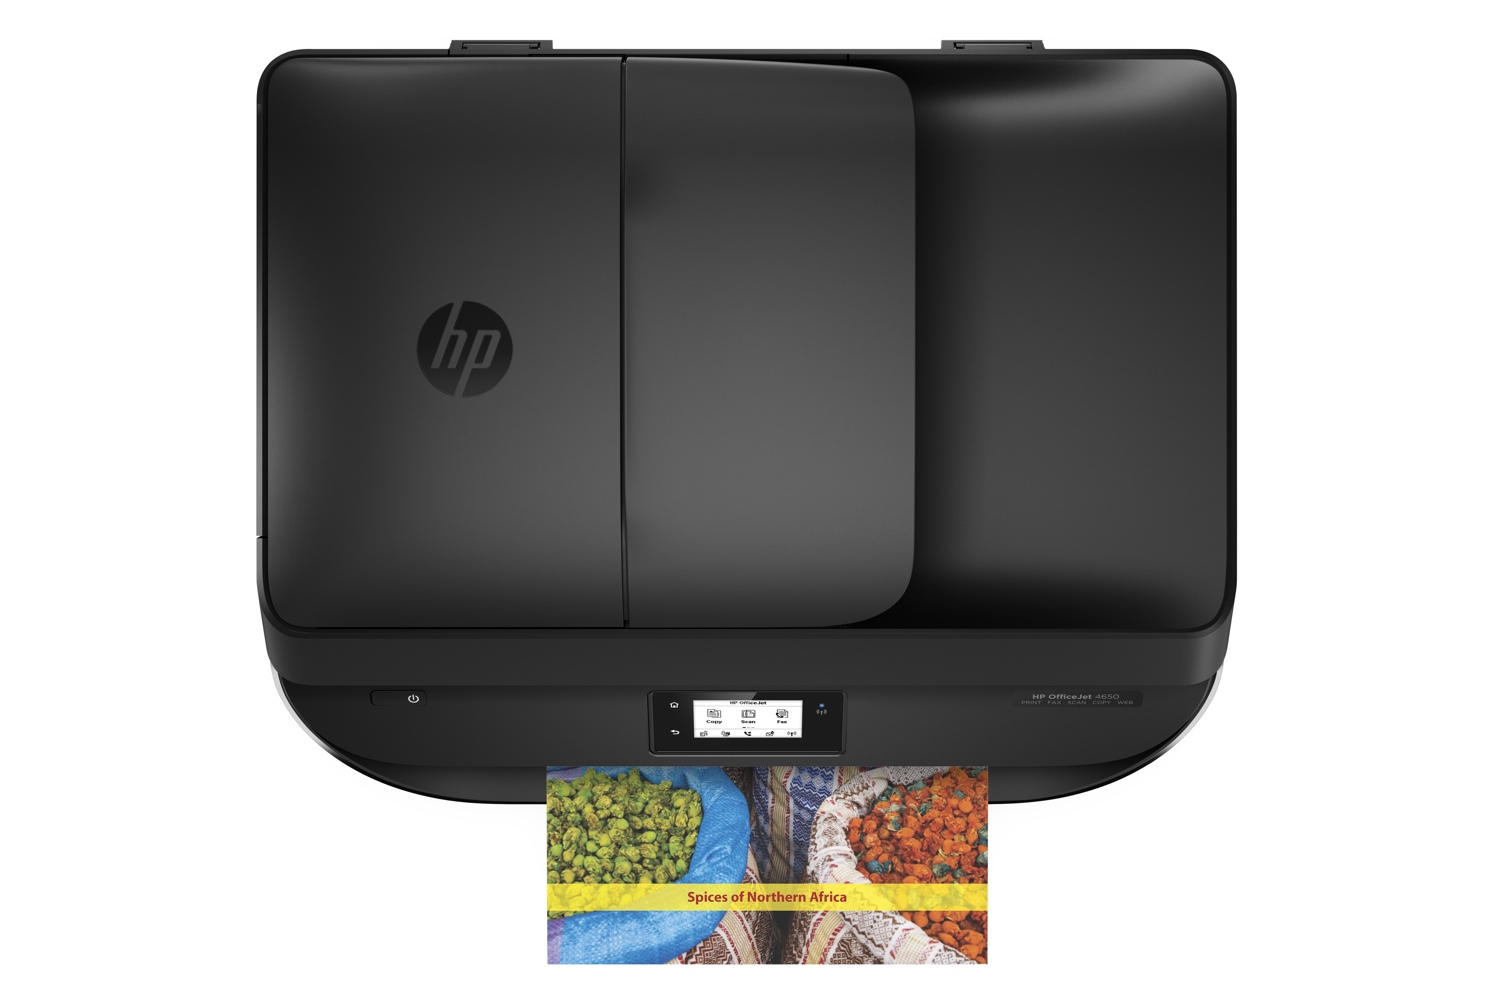 hp puts spotlight on instant ink refill program with new inkjet printers officejet 4650 product